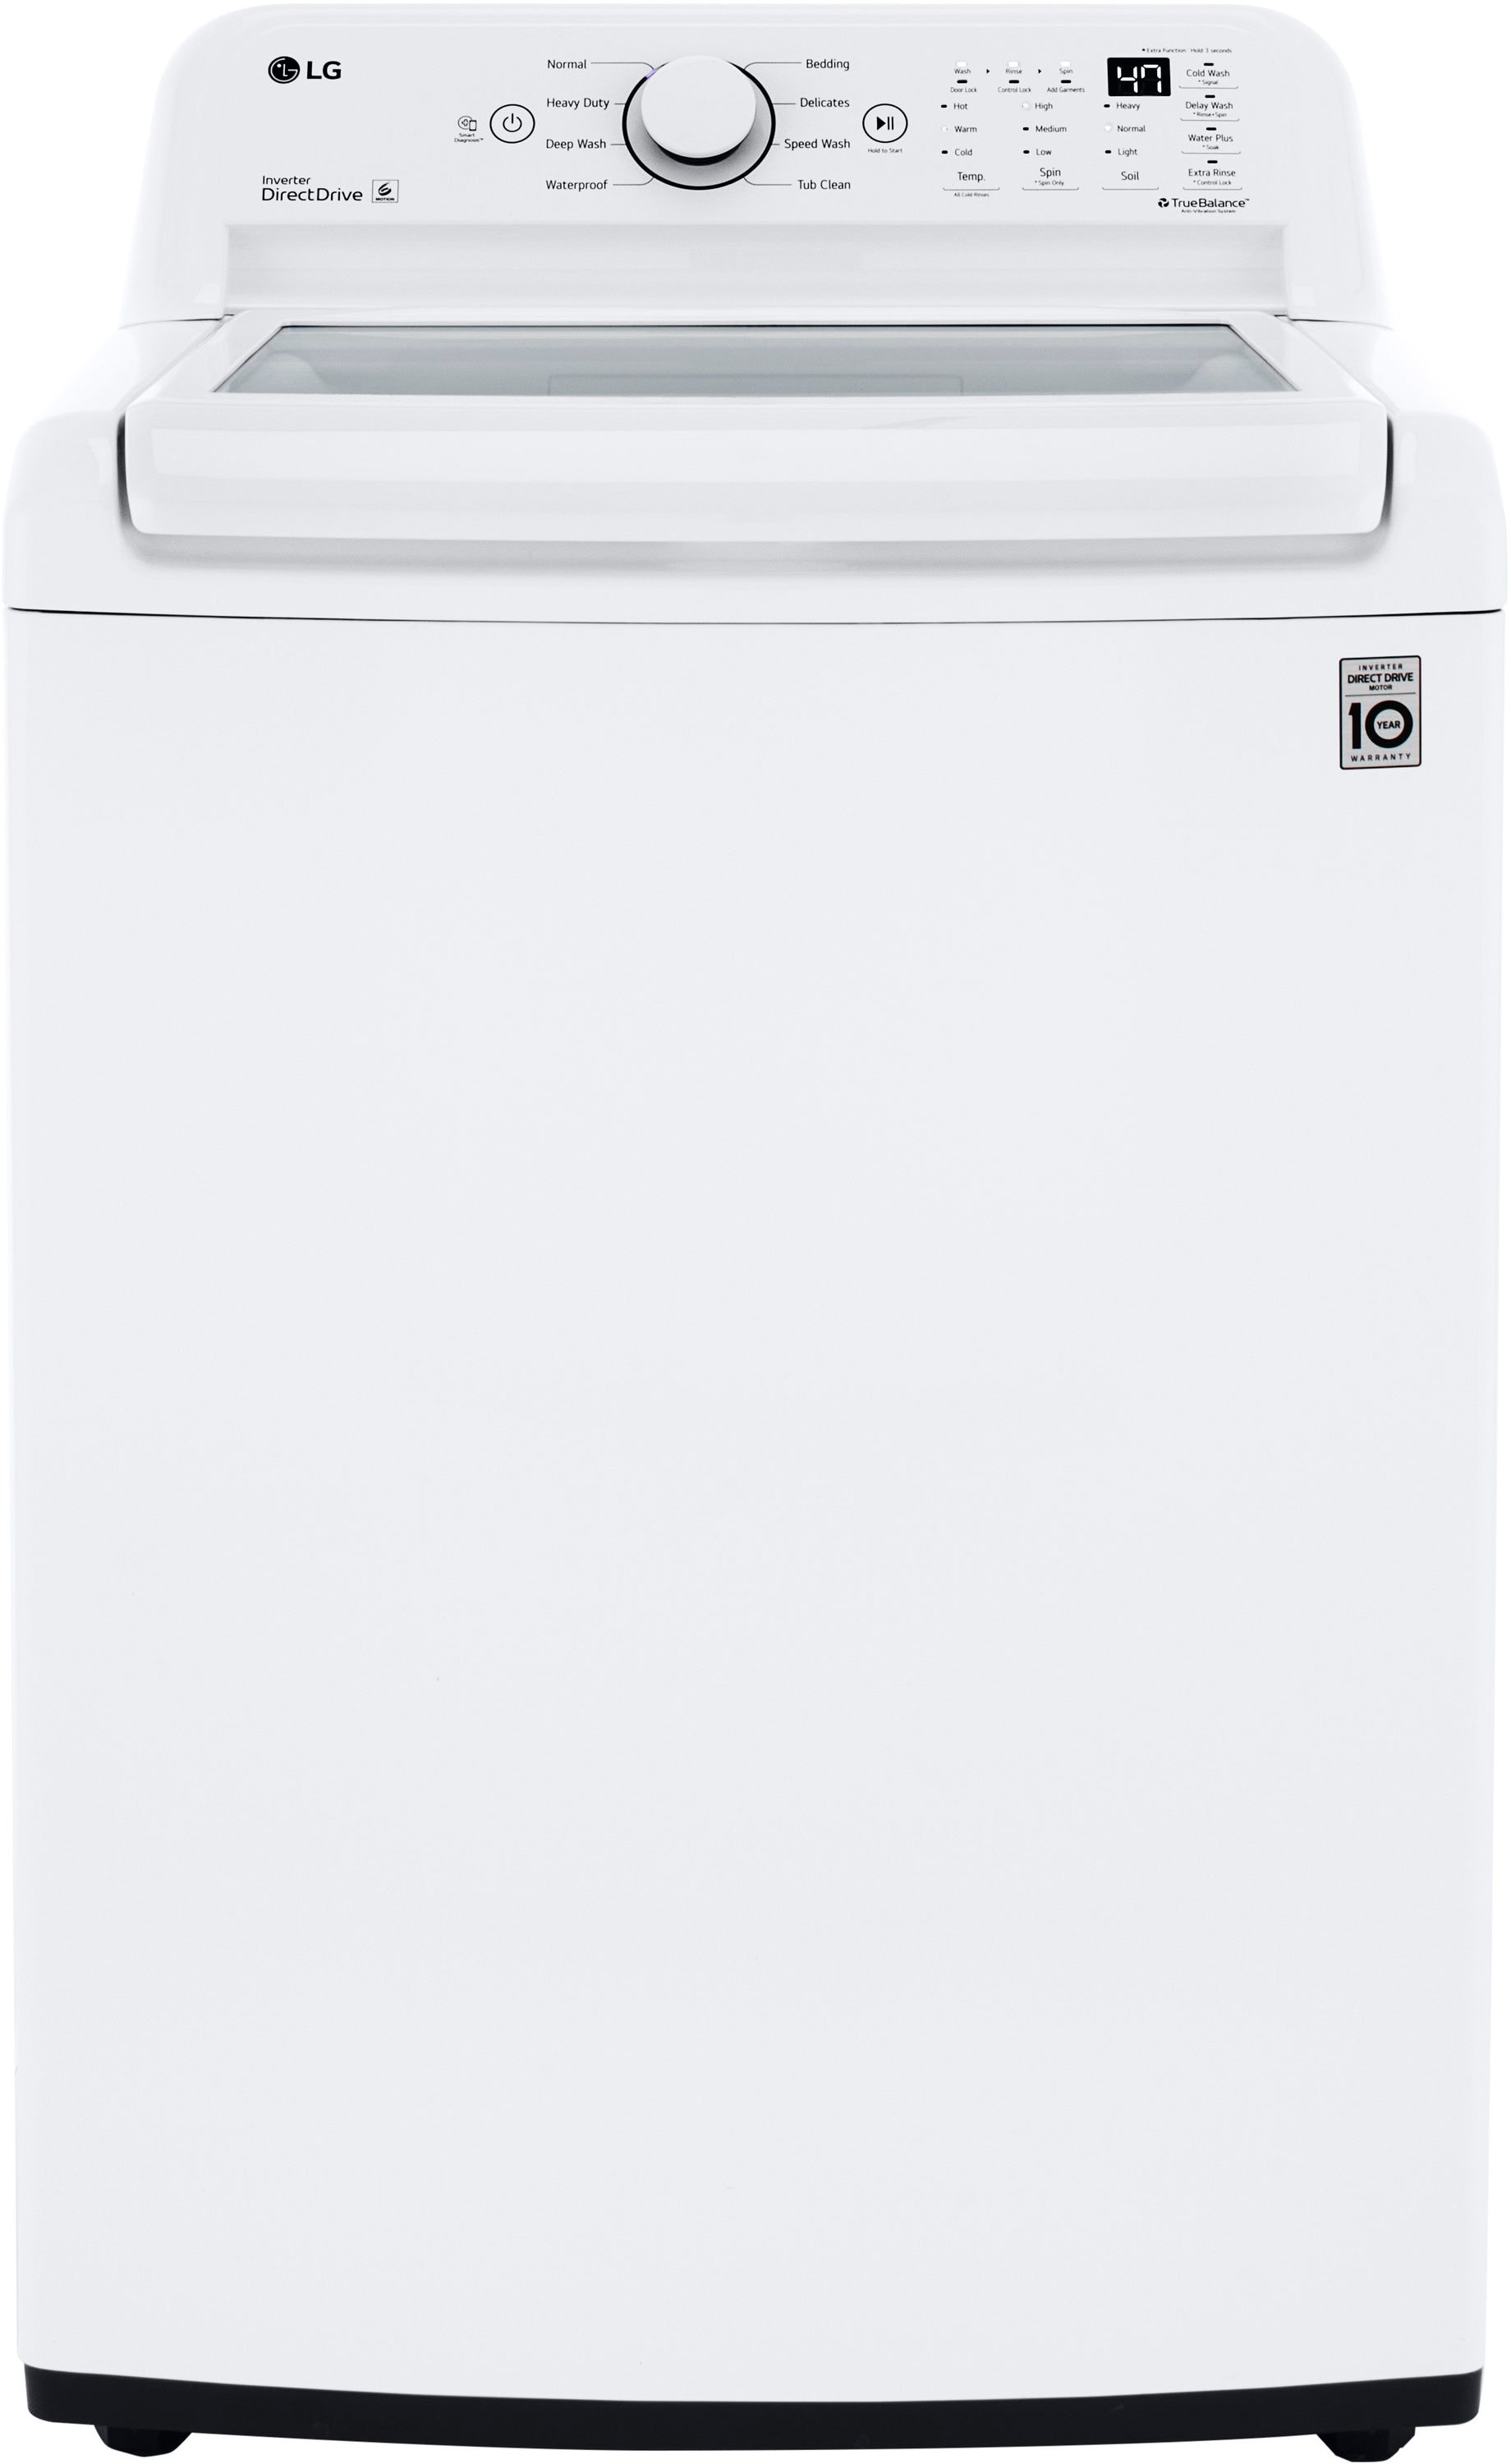 Wood Technology Kitchen Appliance Lift in White